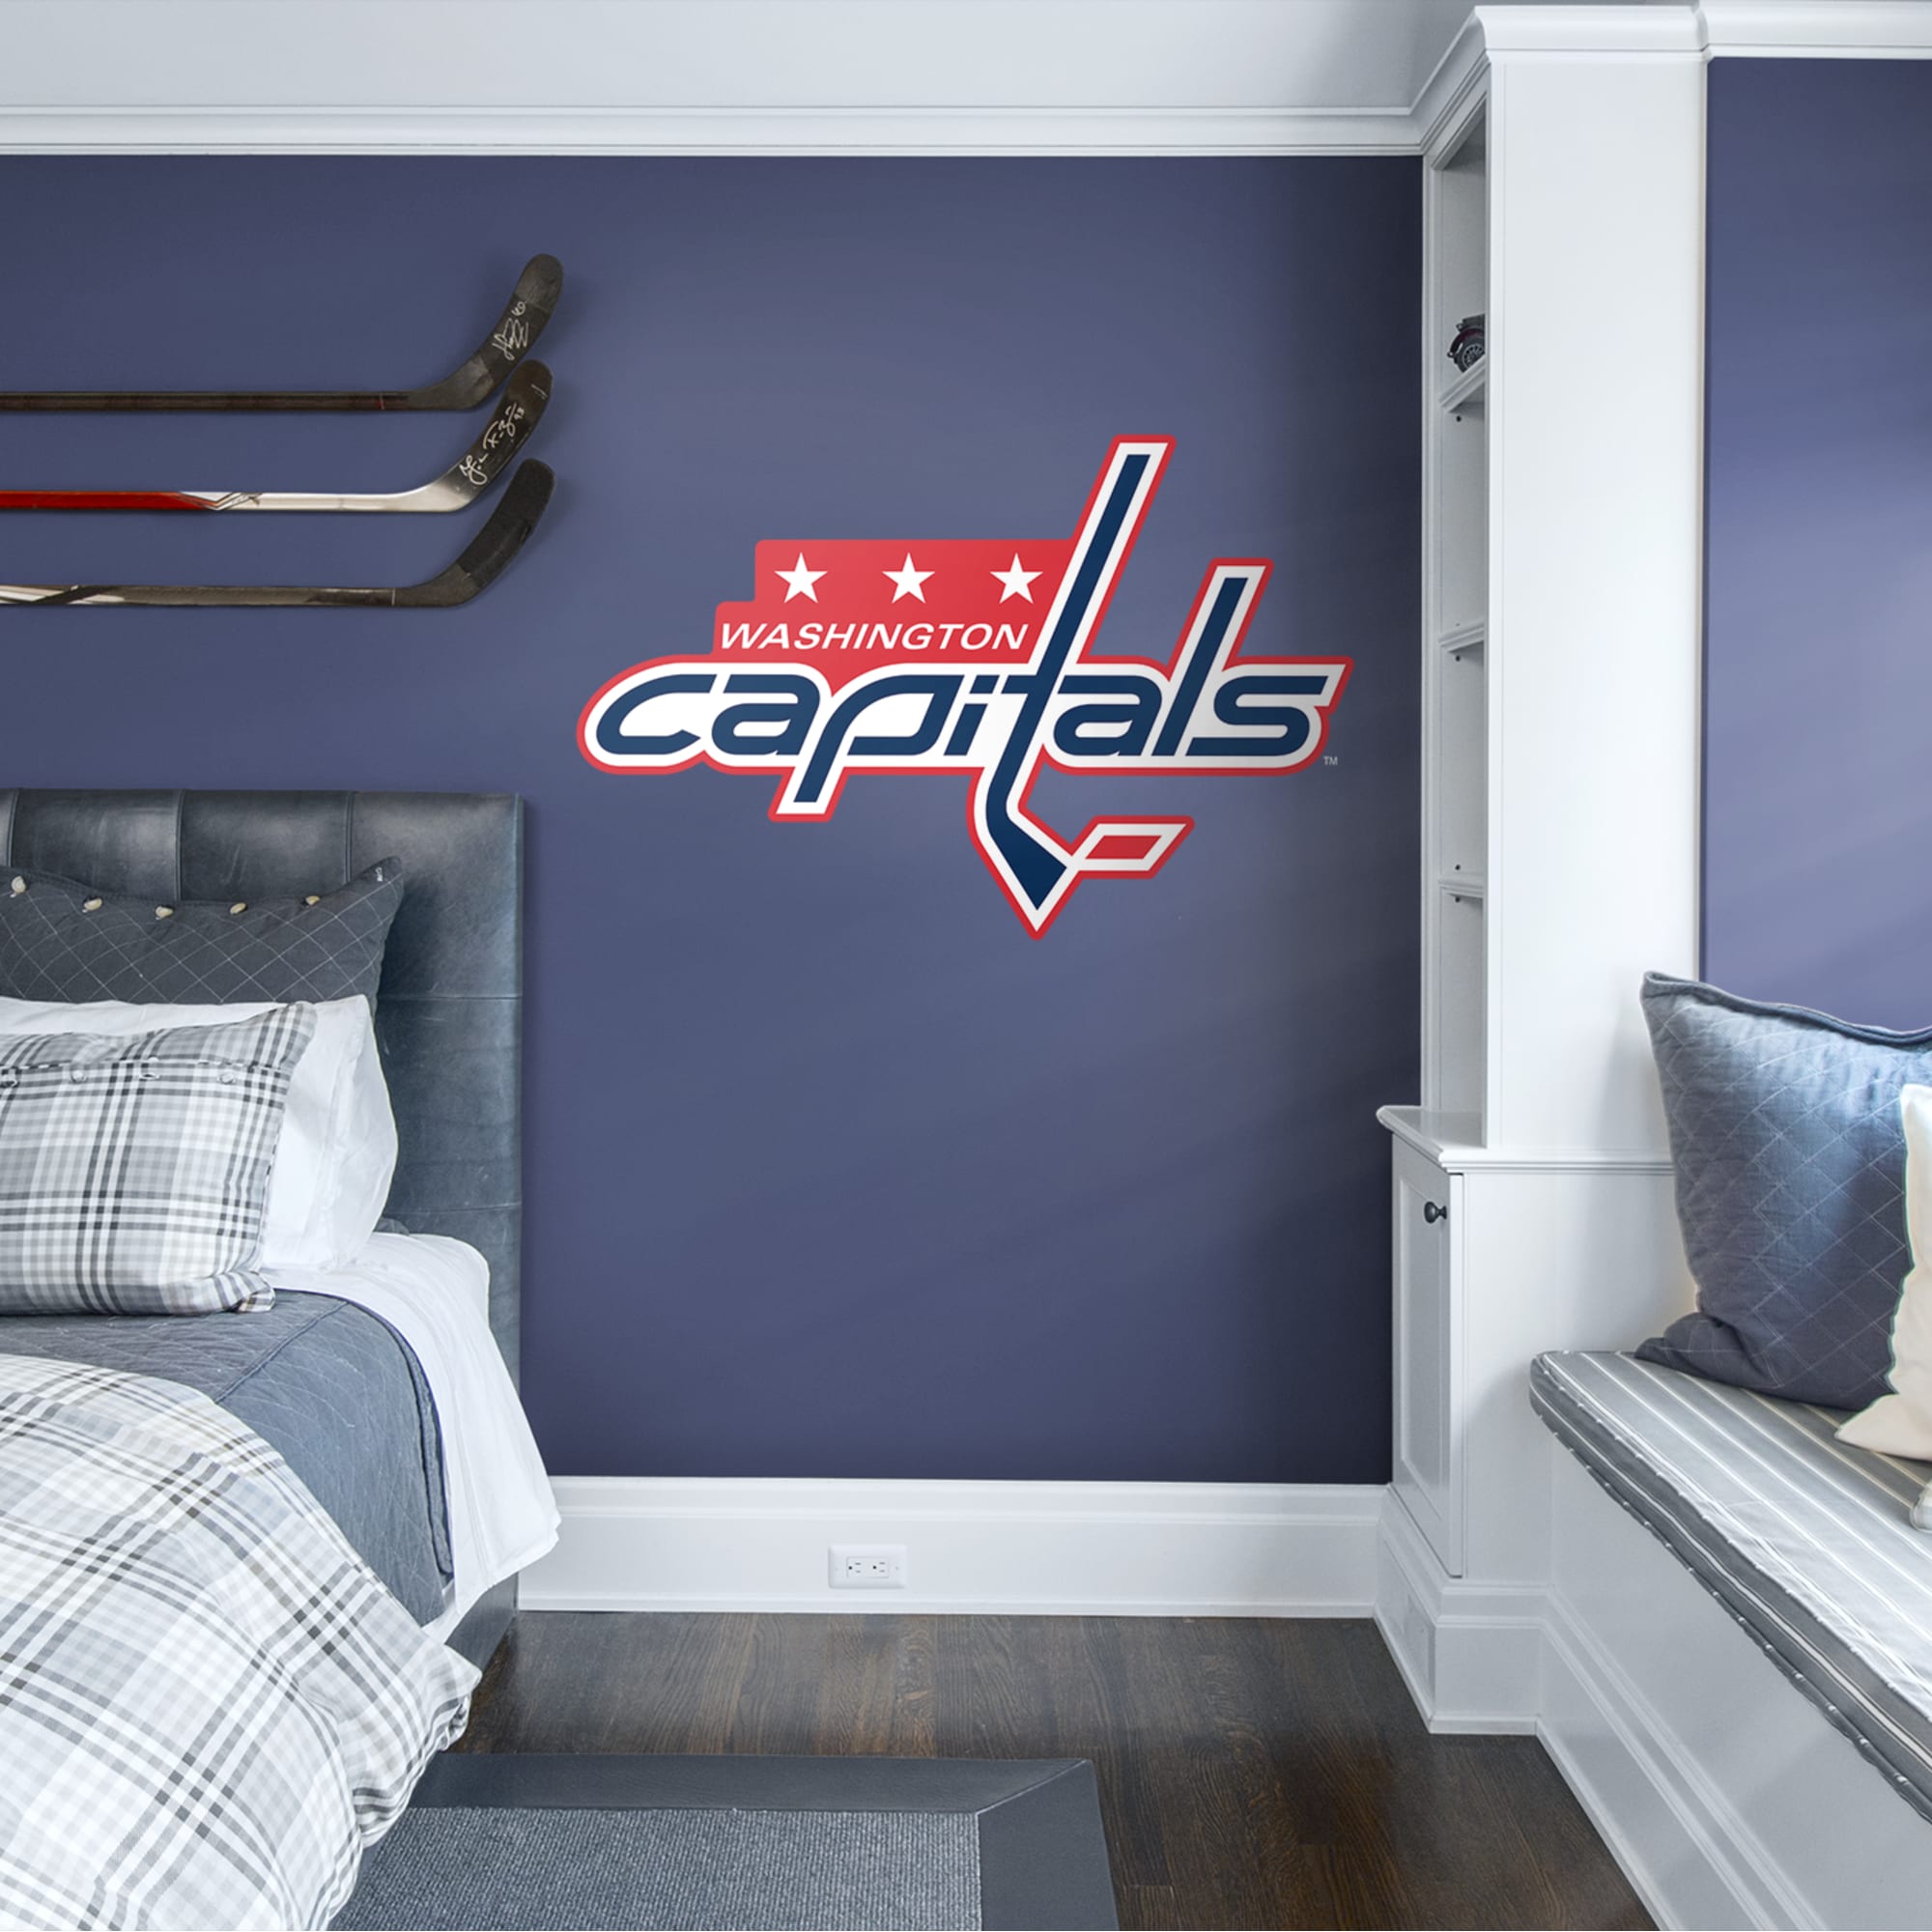 Washington Capitals: Logo - Officially Licensed NHL Removable Wall Decal Giant Logo (55"W x 36"H) by Fathead | Vinyl